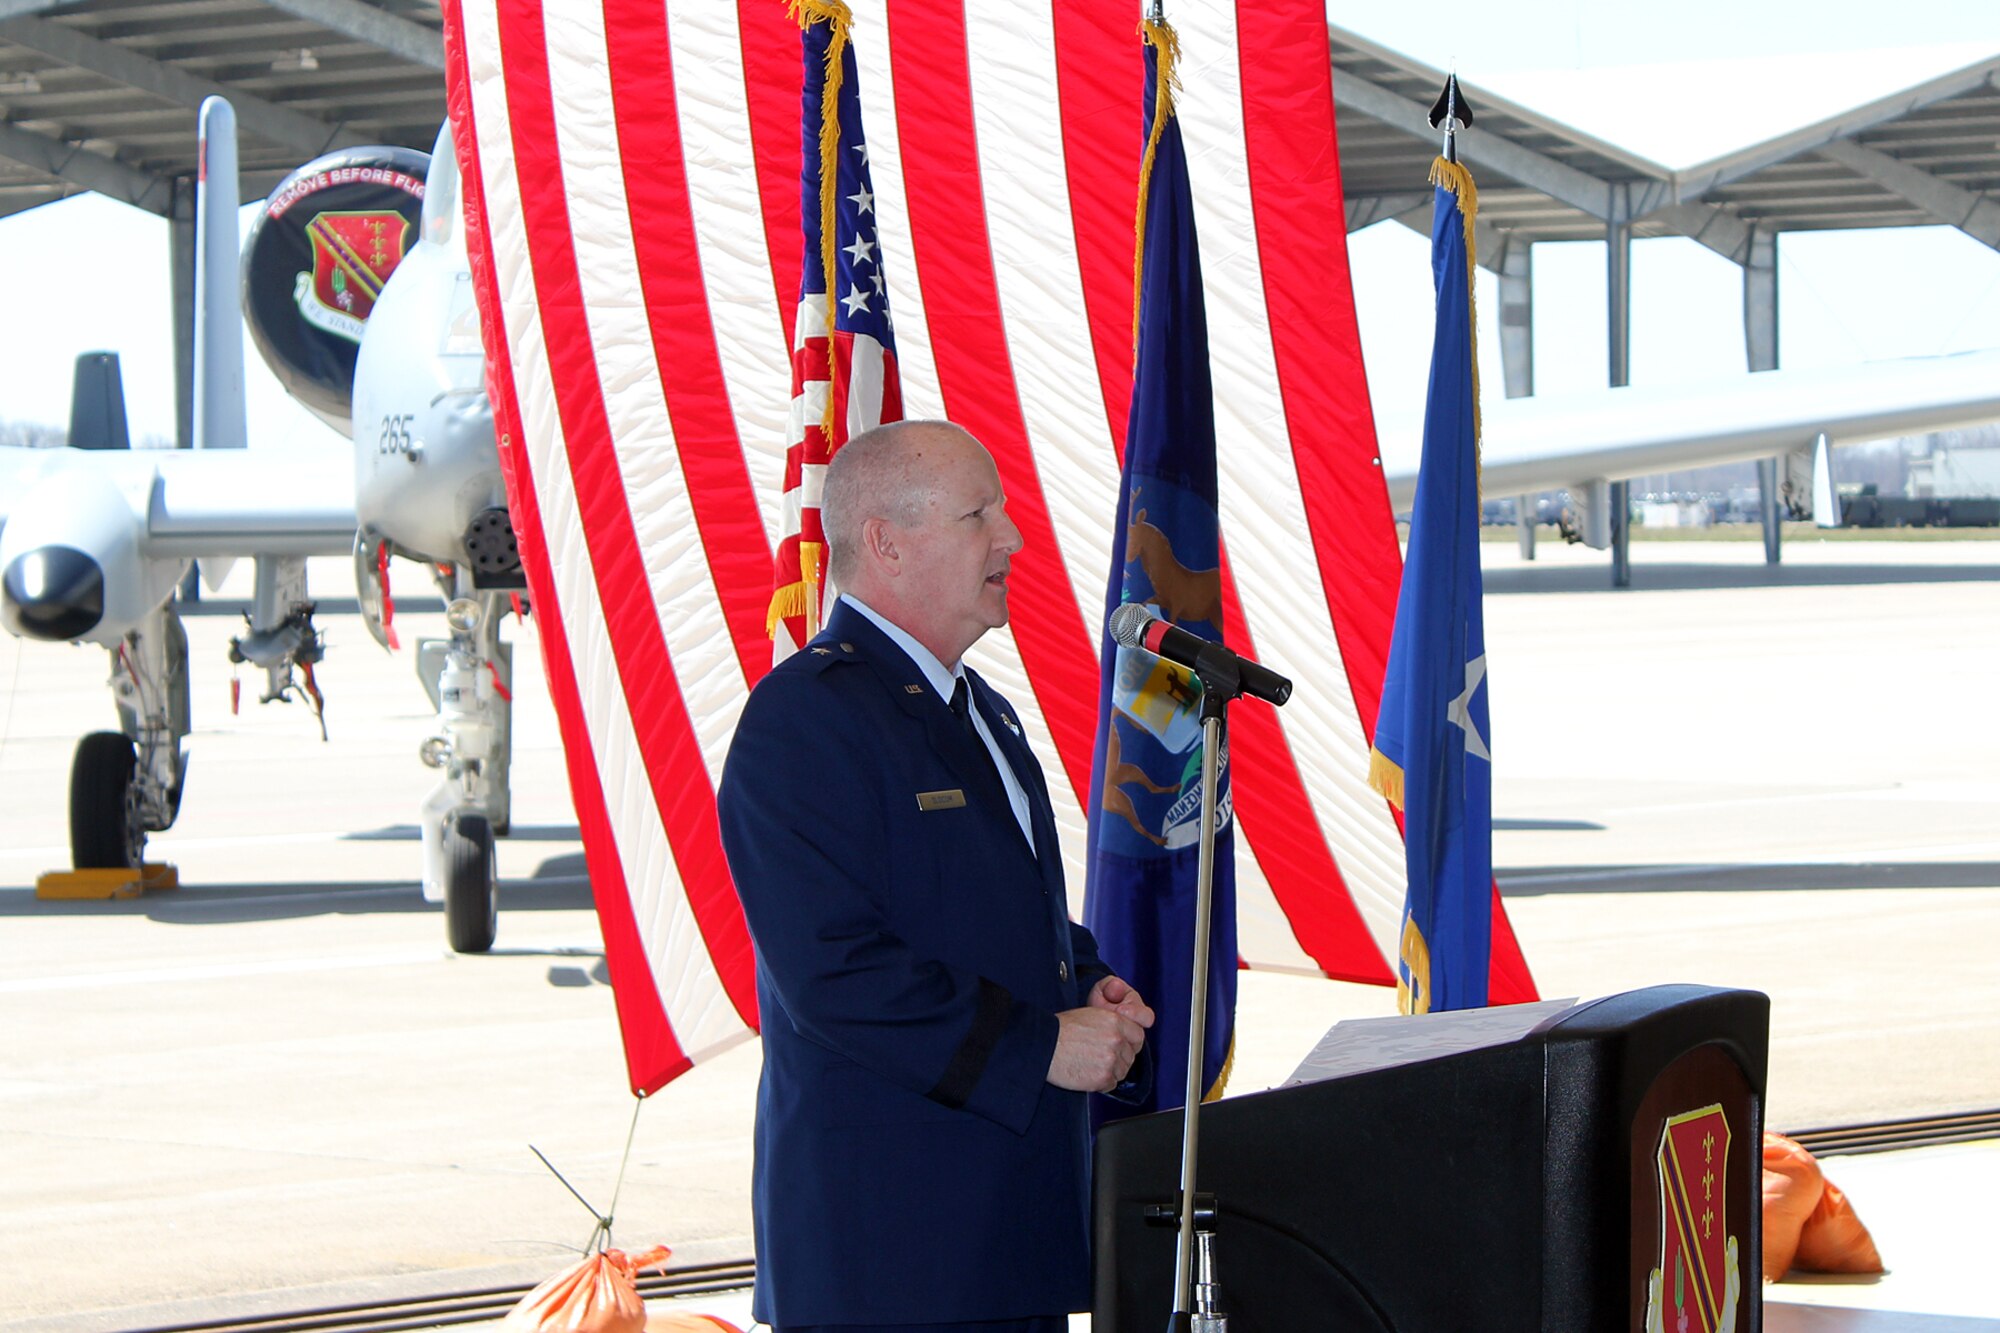 Brig. Gen. John D. Slocum, 127th Wing commander, addresses the troops during a change of command ceremony for the 127th Maintenance Group at Selfridge Air National Guard Base, Mich., April 16, 2017. The Group maintains the A-10 Thunderbolt II aircraft at Selfridge. (U.S. Air National Guard photos by Tech. Sgt. Dan Heaton)